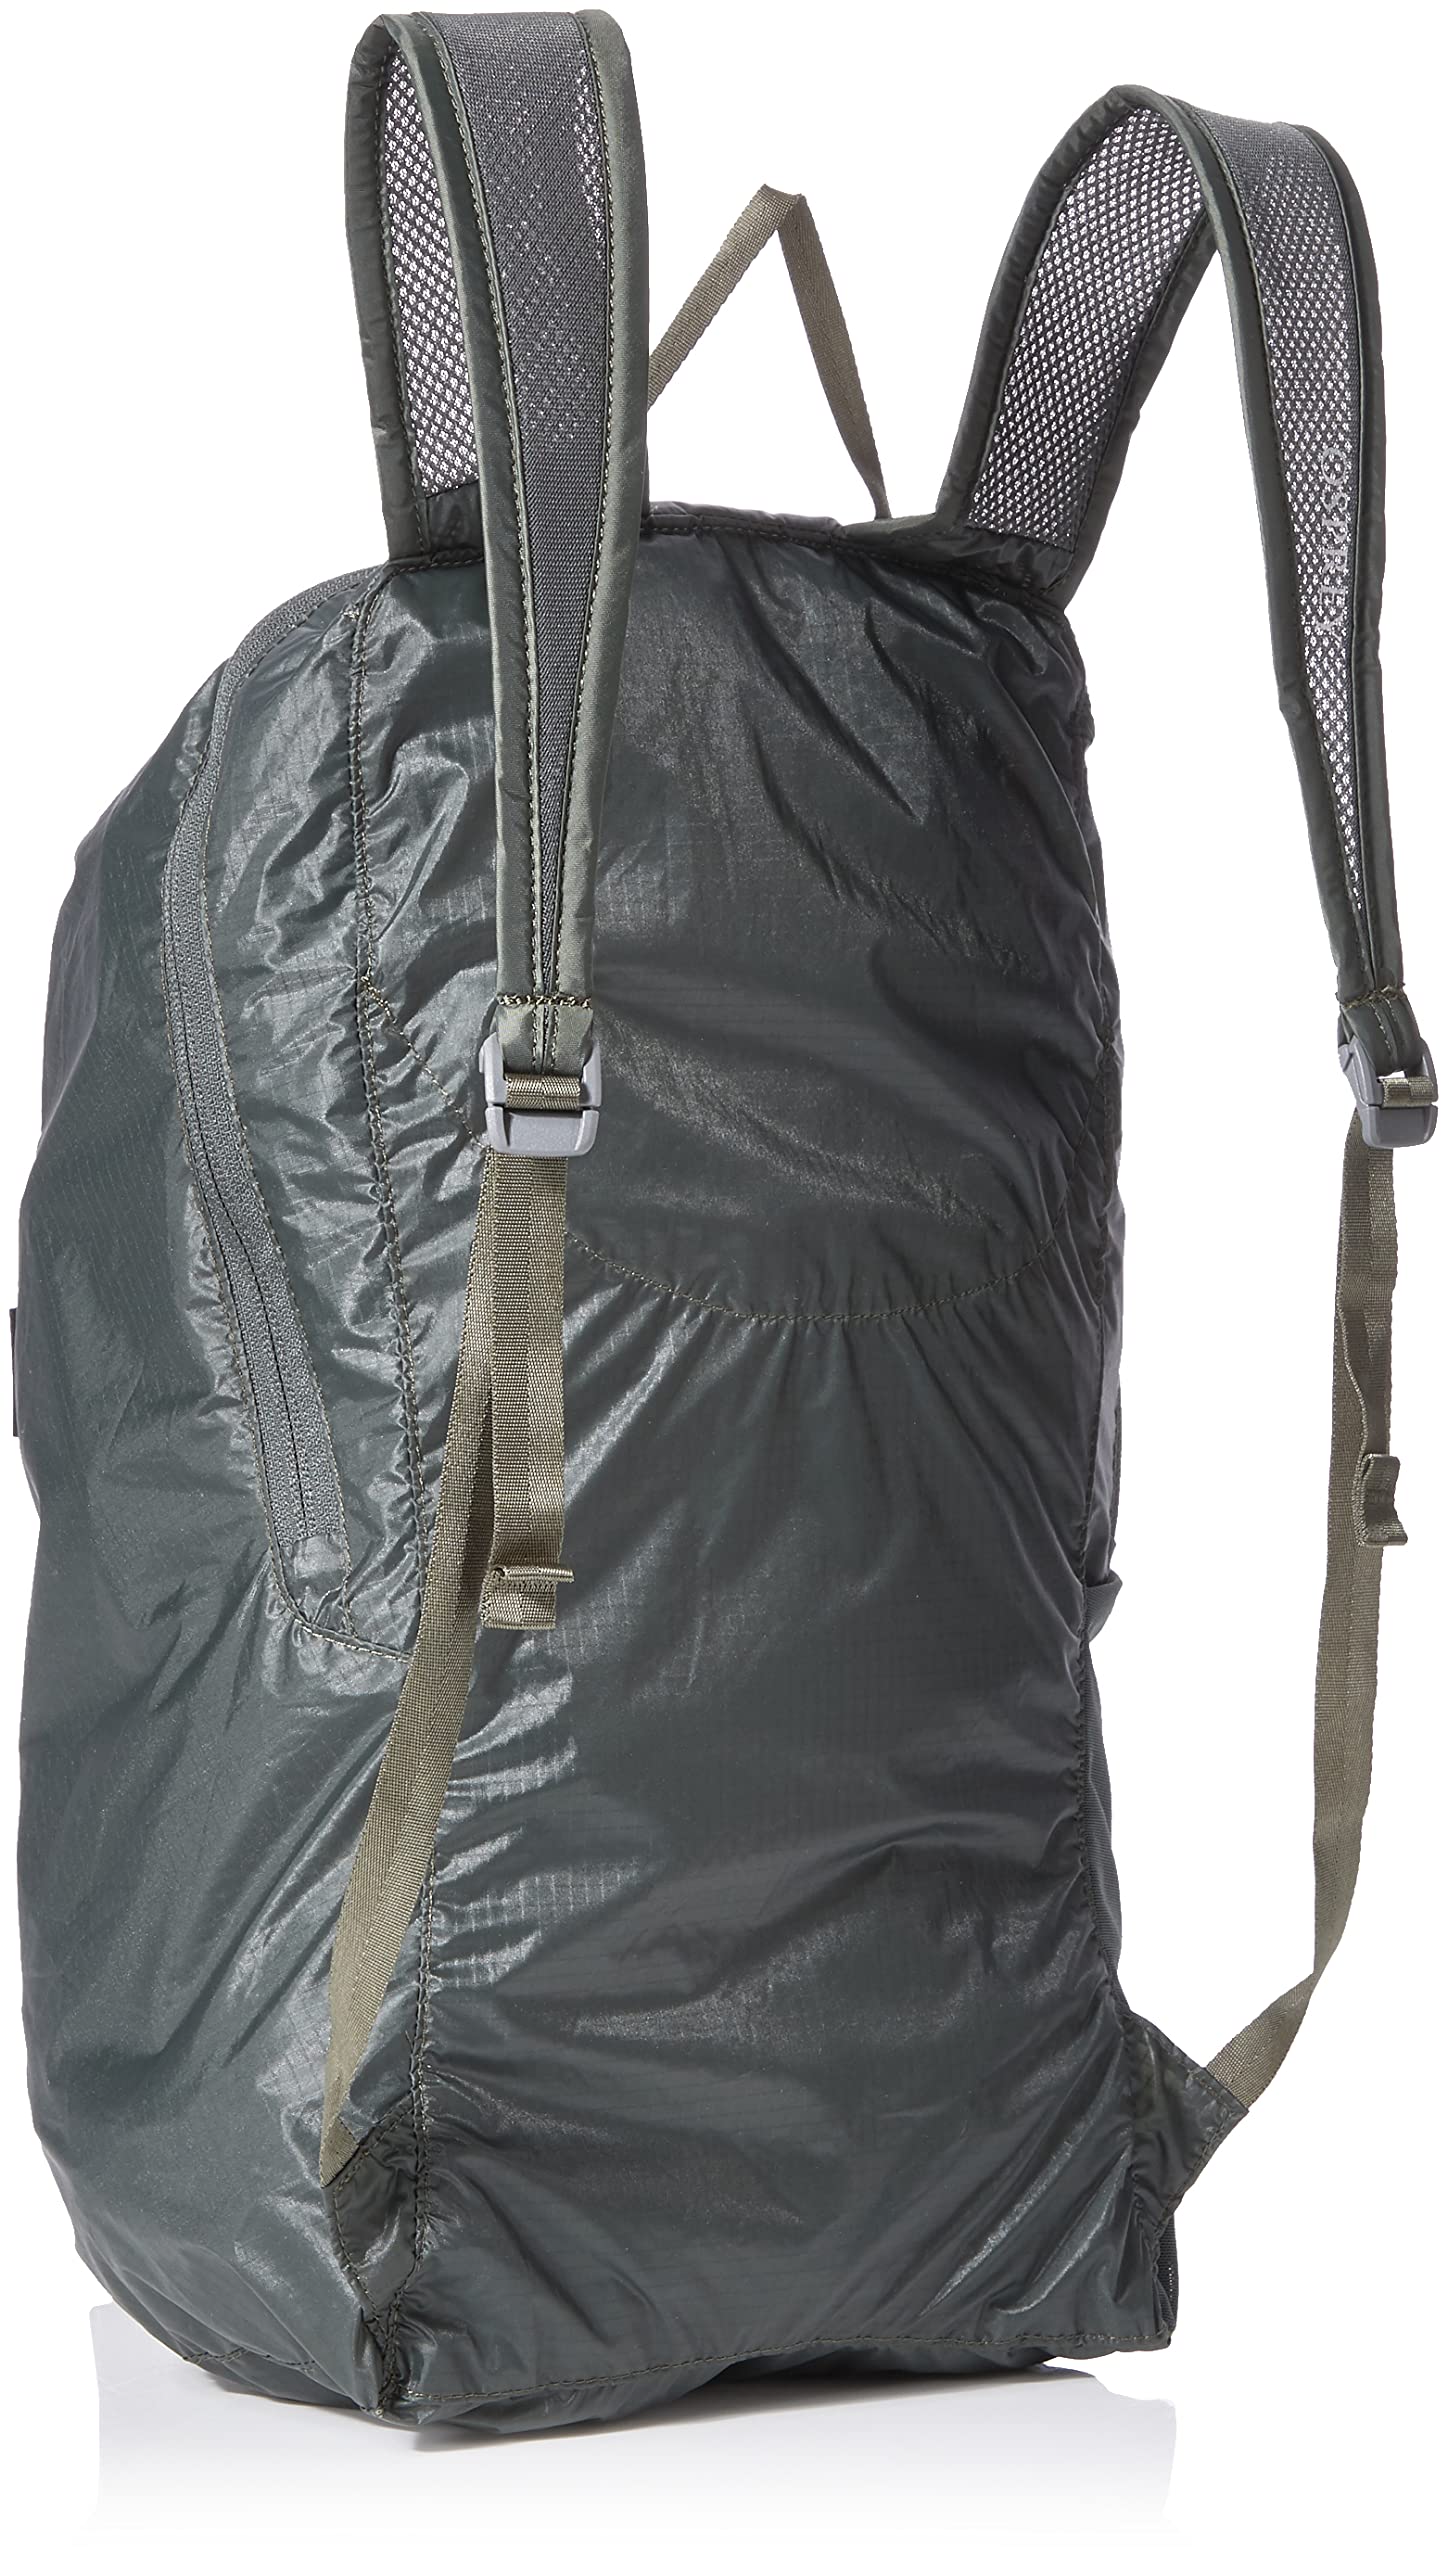 Discontinued Osprey Ultralight Stuff Pack, Shadow Grey, One Size